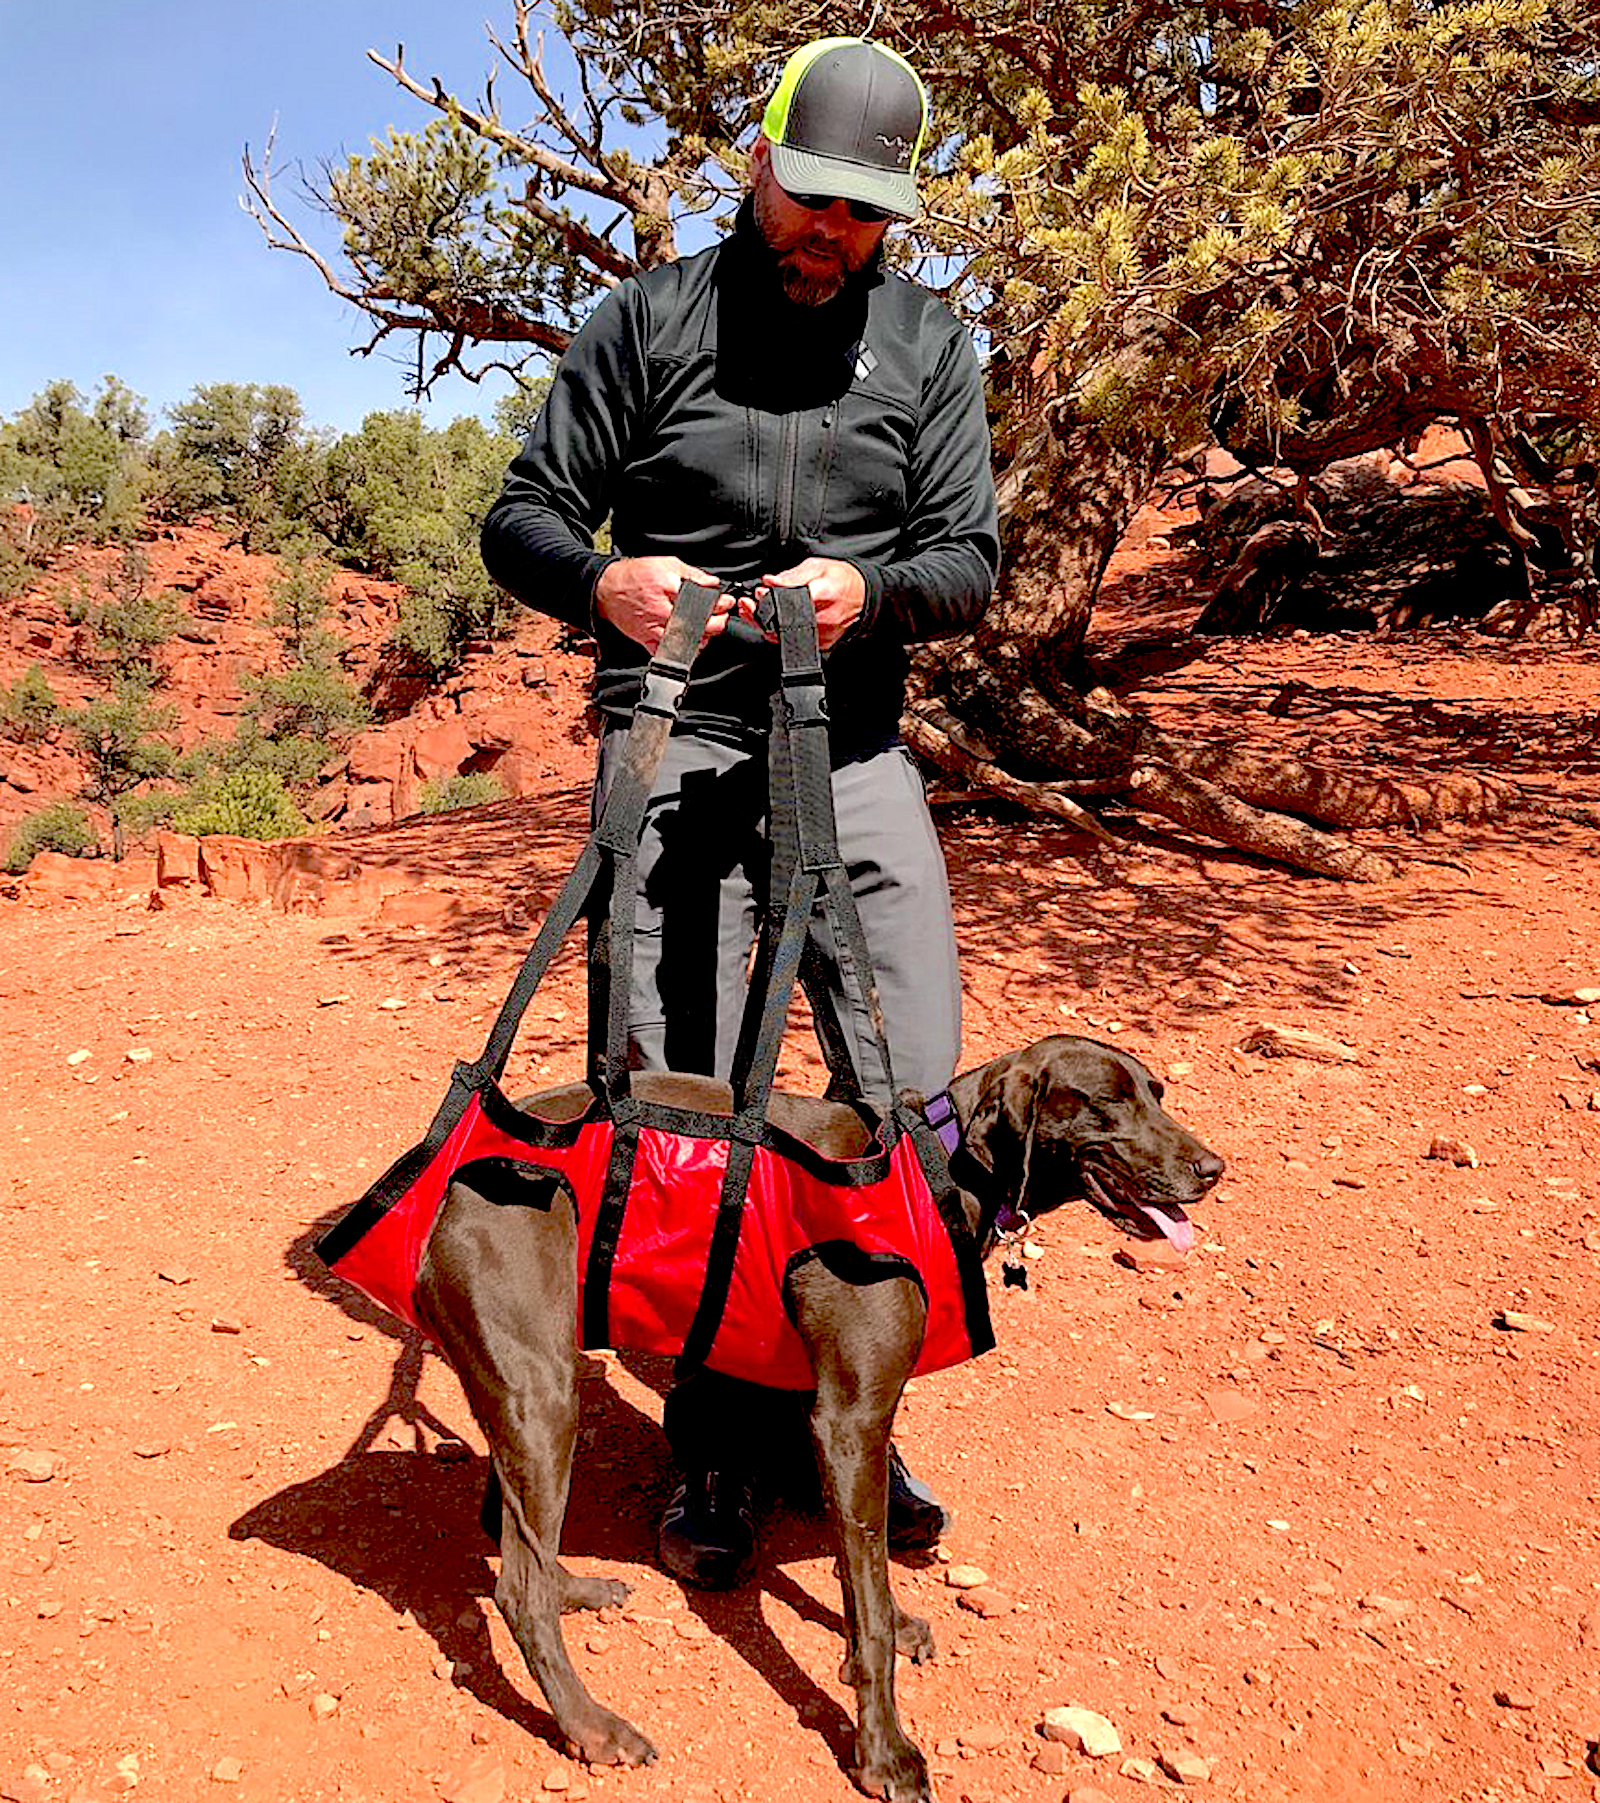 FIDO PRO AIRLIFT: hammock-style backpack to easily lift and carry your canine friend - Vital Vet